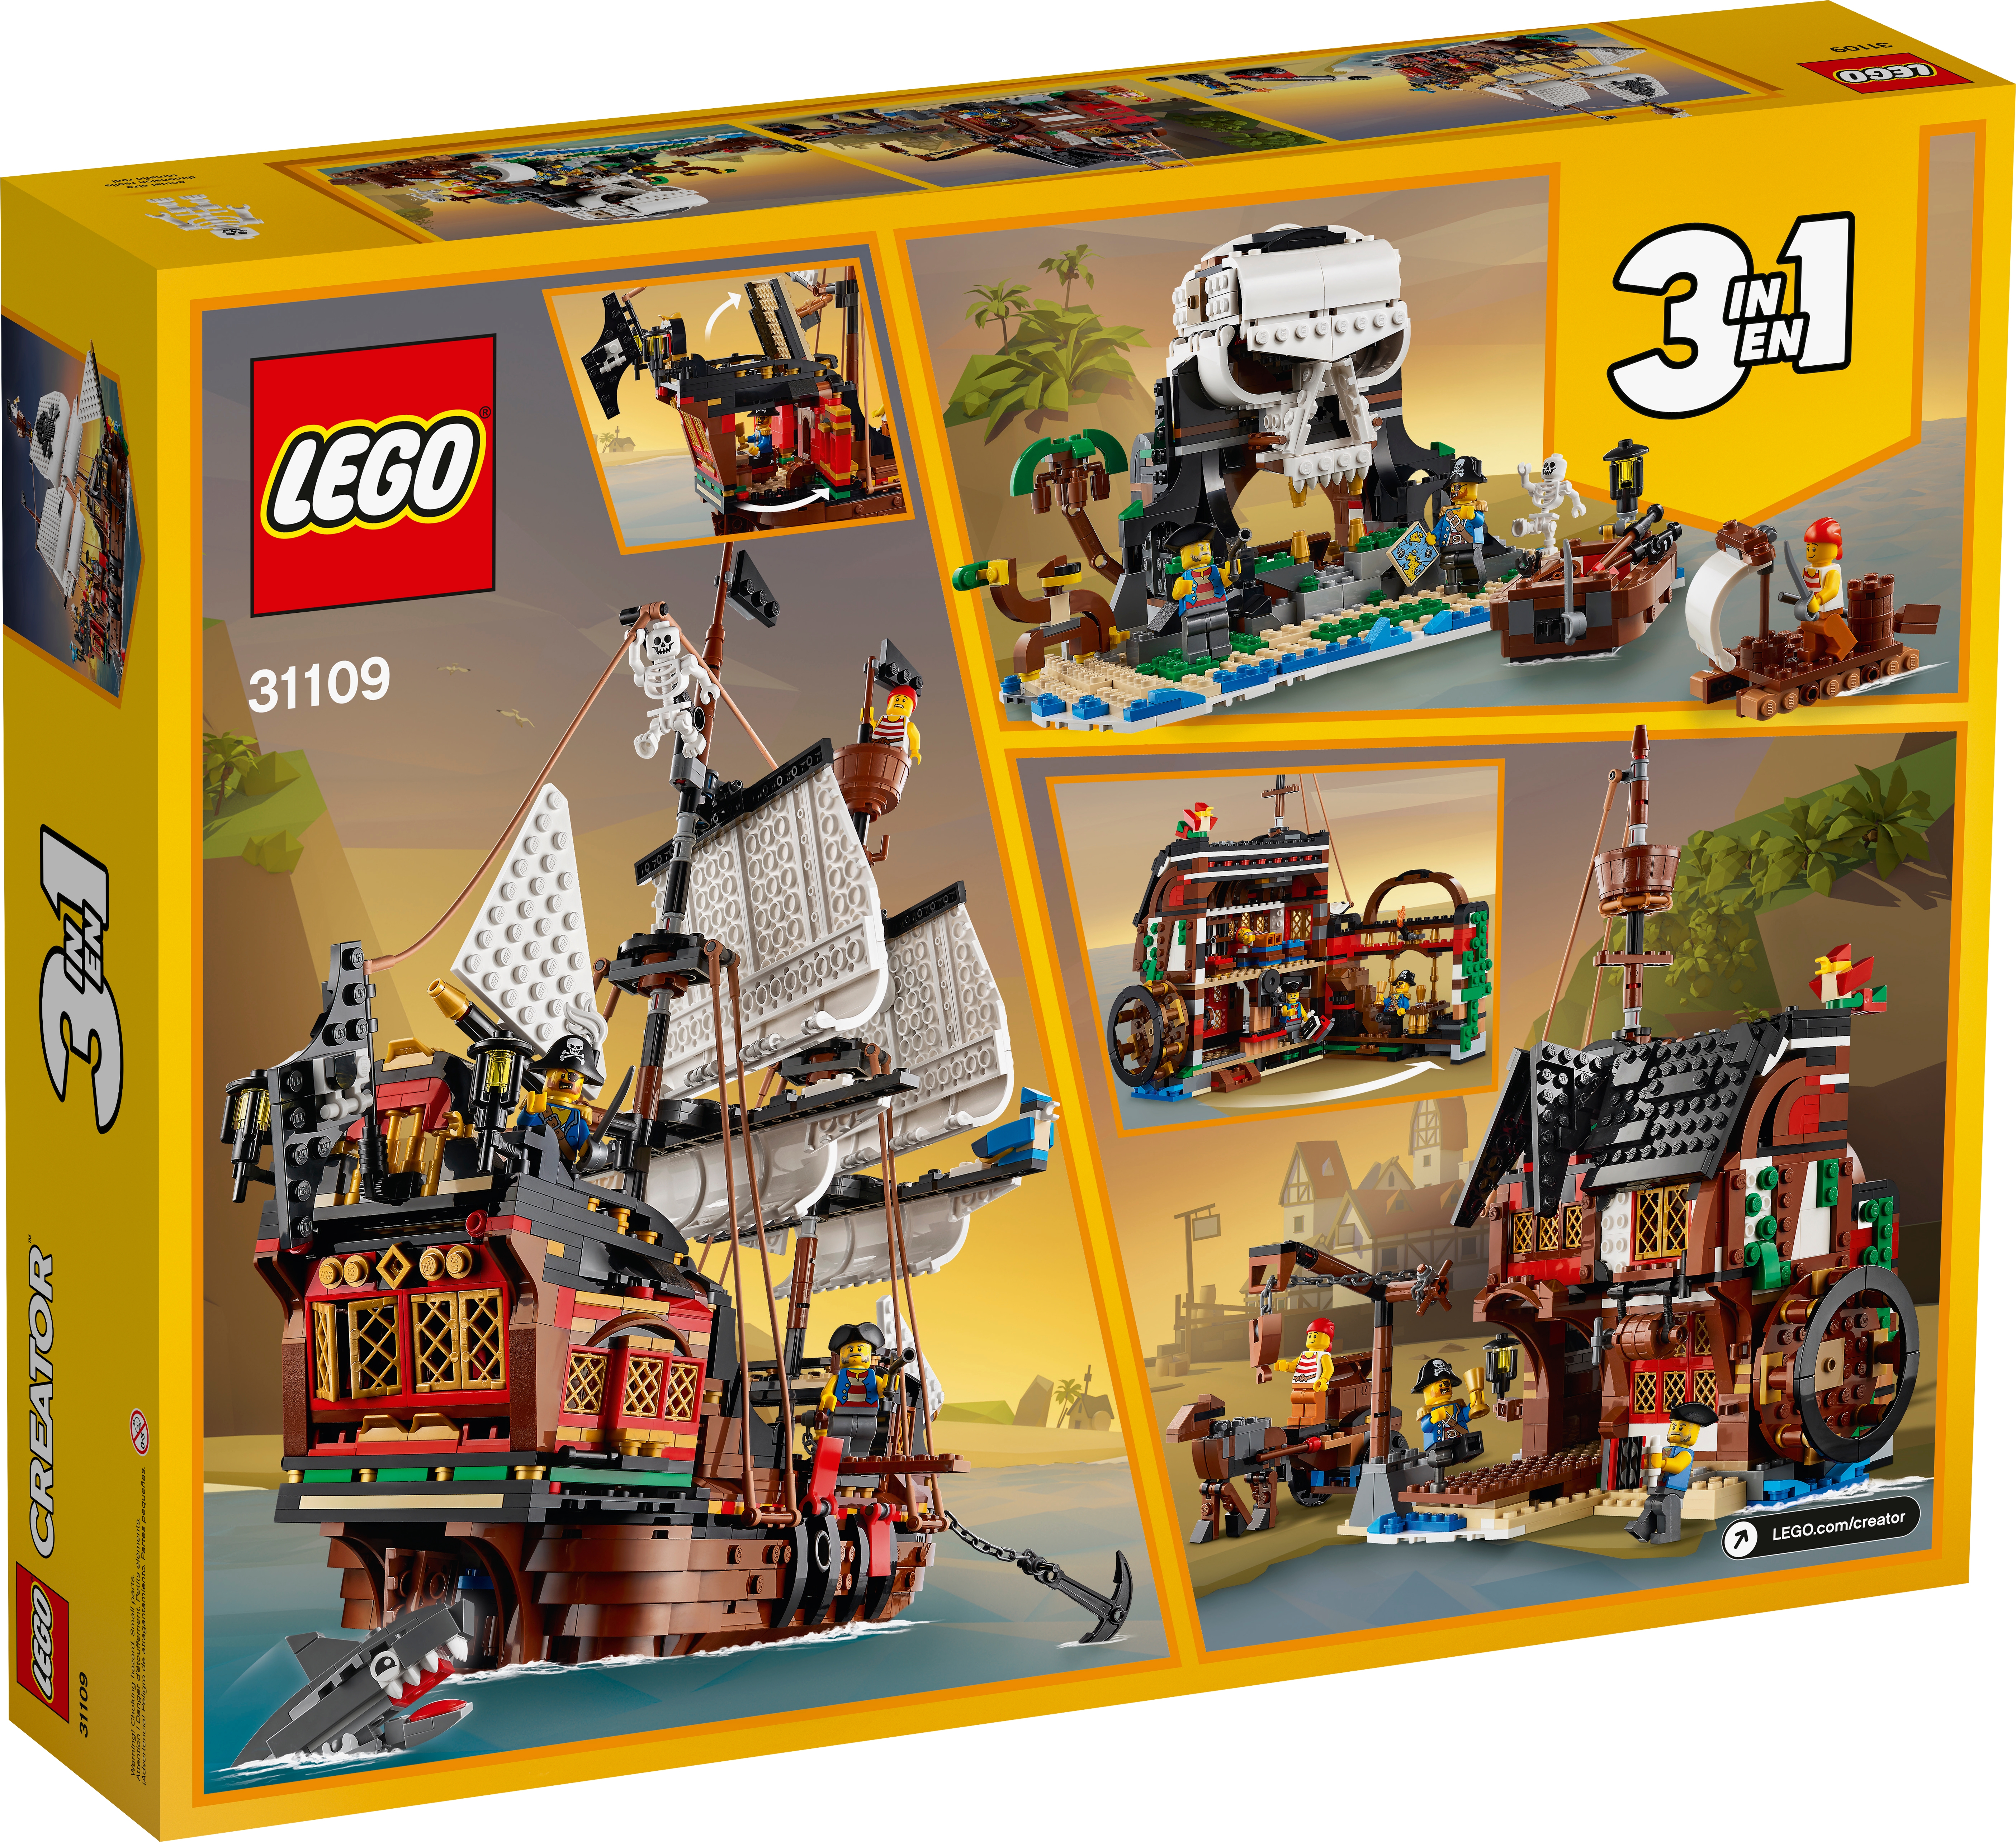 Makes a Great Gift for Children who like Creative Play and Adventures New 2020 LEGO Creator 3in1 Pirate Ship 31109 Building Playset for Kids who Love Pirates and Model Ships 1,260 Pieces 